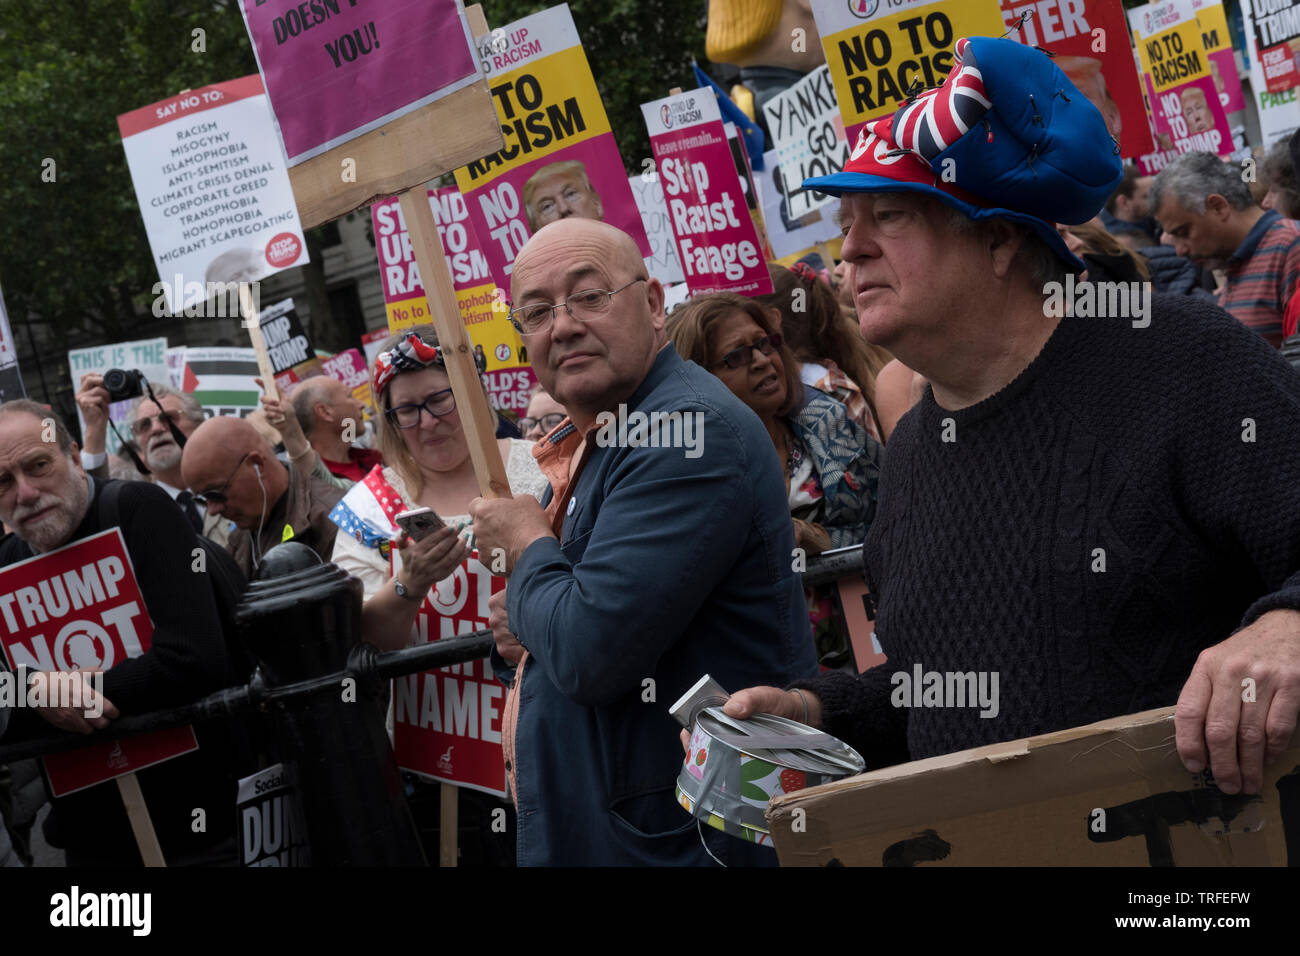 Together Against Trump, national demonstration, 4th June 2019 in London. Thousands gather in central London to protest against Donald Trump's State Visit to London. Protesters demostrate against his racism, mysogyny, climate denial and interference in British politics.. (photo by Mike Abrahams) Stock Photo